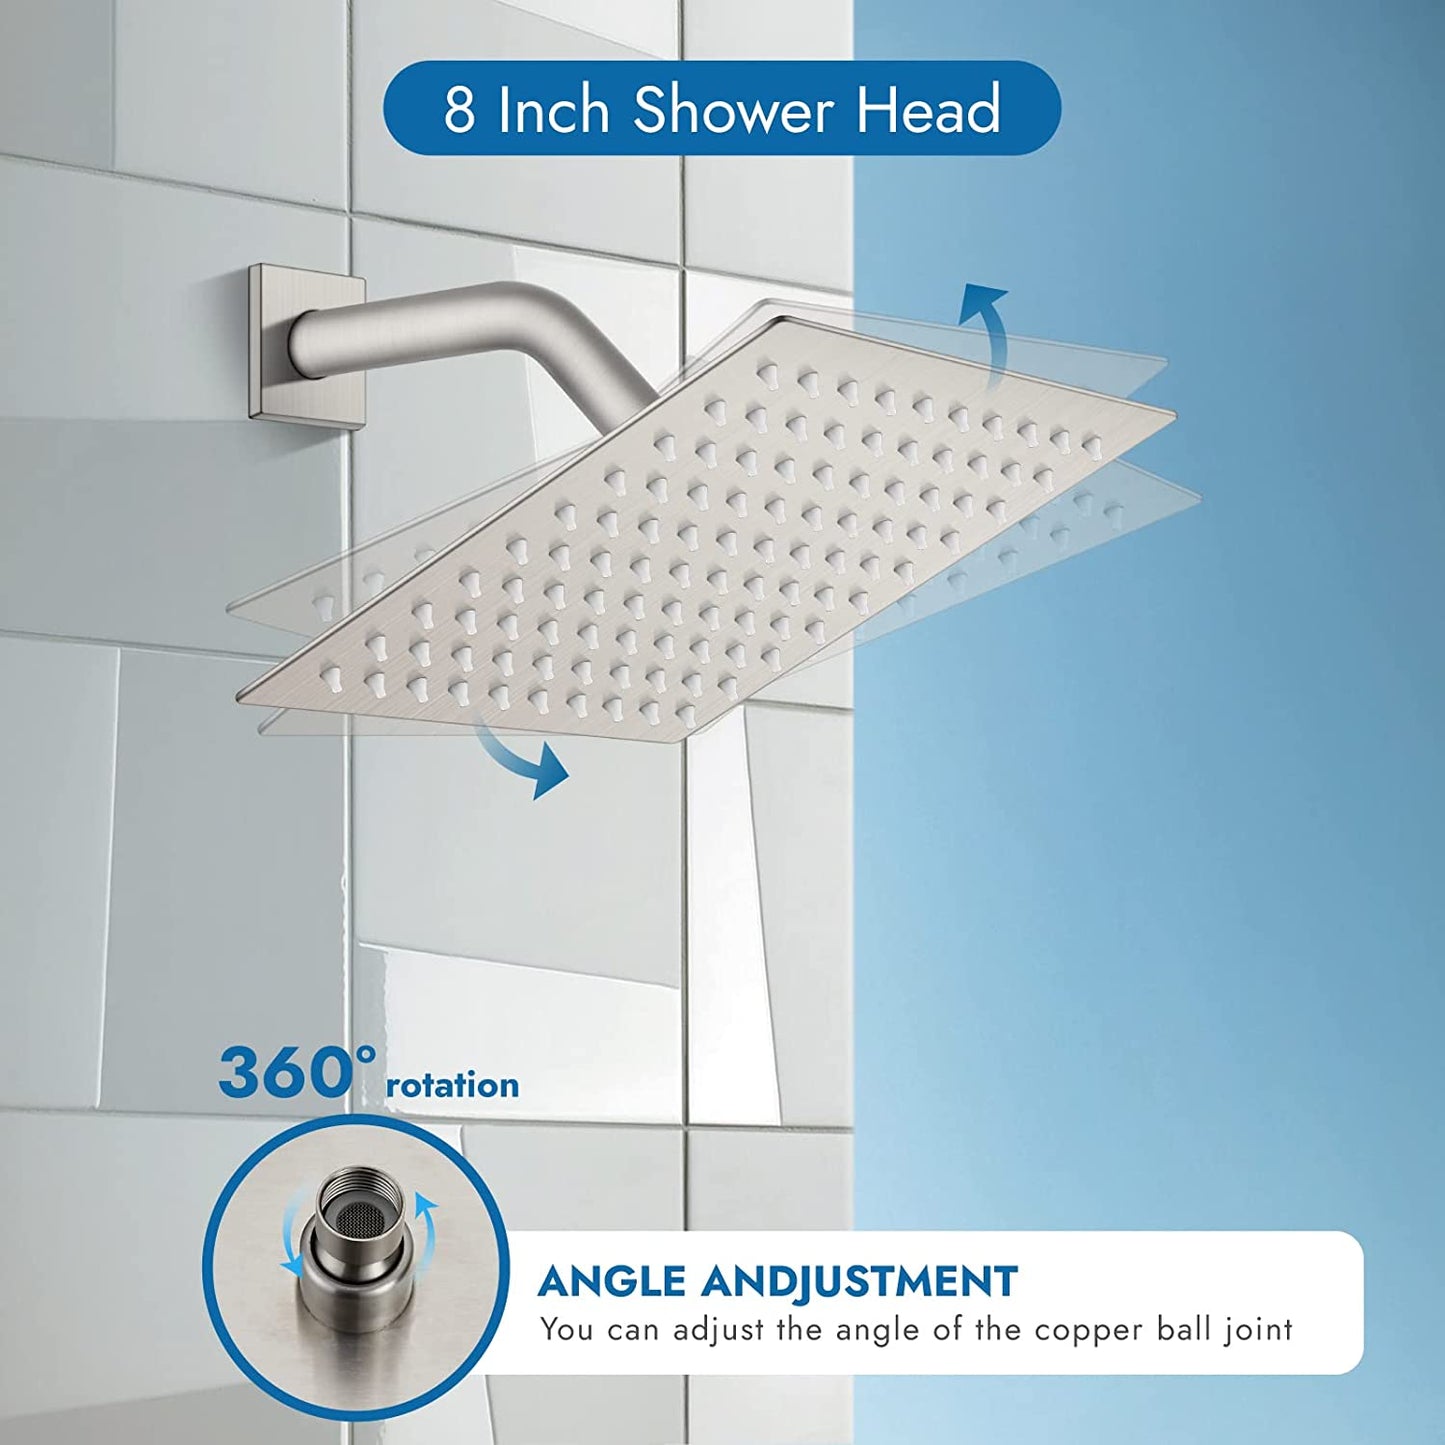 
                  
                    Cinwiny Wall Mounted Rain Shower System with 8 Inch Square Showerhead Bathroom Shower Faucet Set Single Function Single Handle With Rough-in Valve Bathroom Rainfall Shower Trim Kit
                  
                